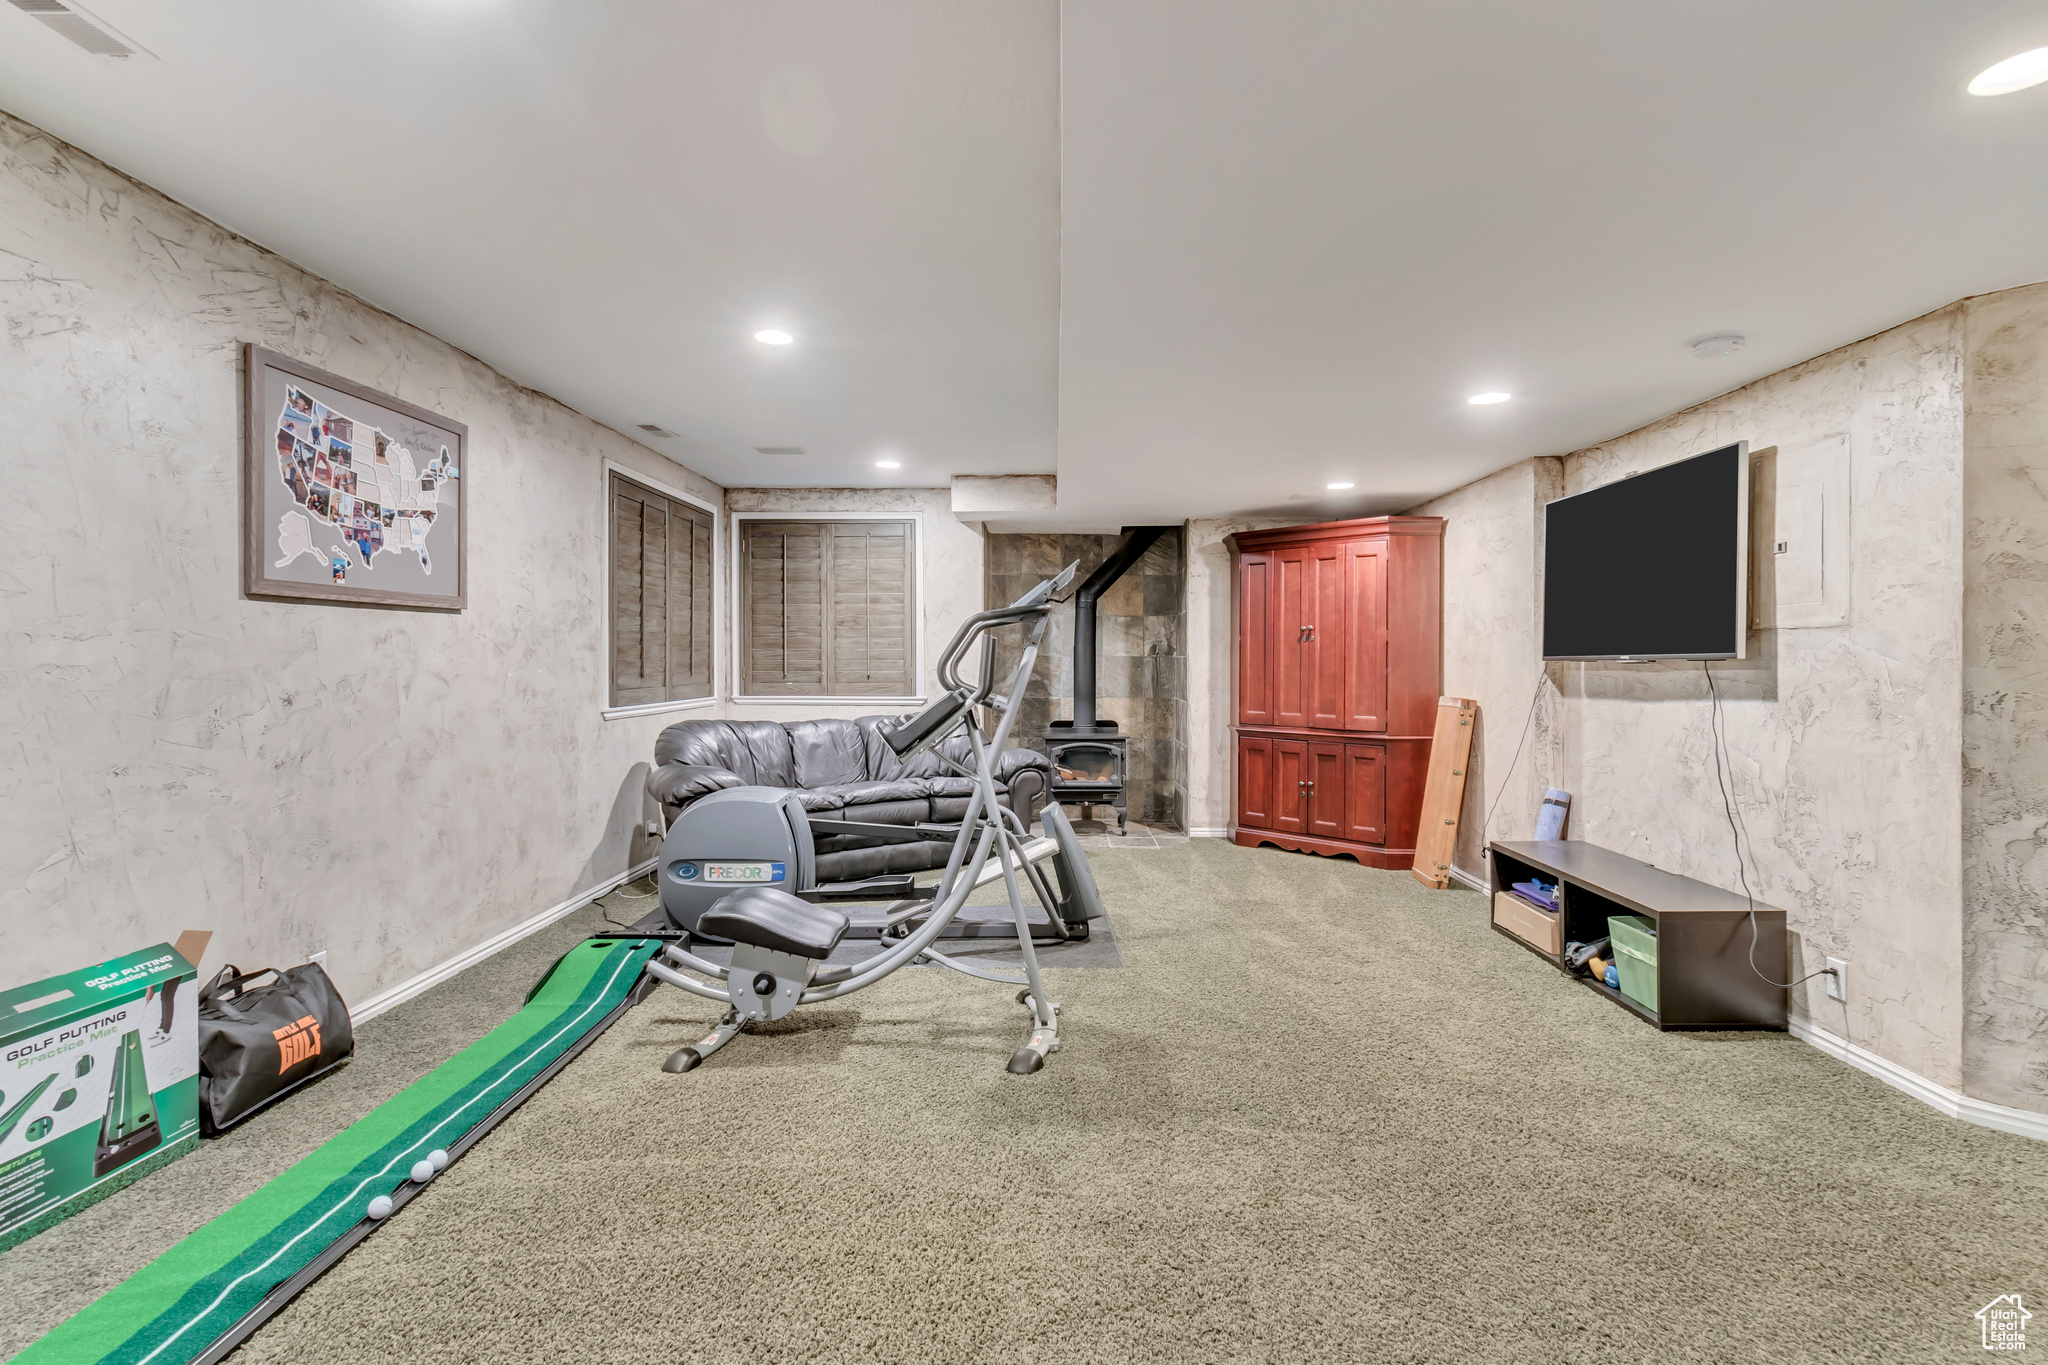 Recreation Family room, also used as an exercise room